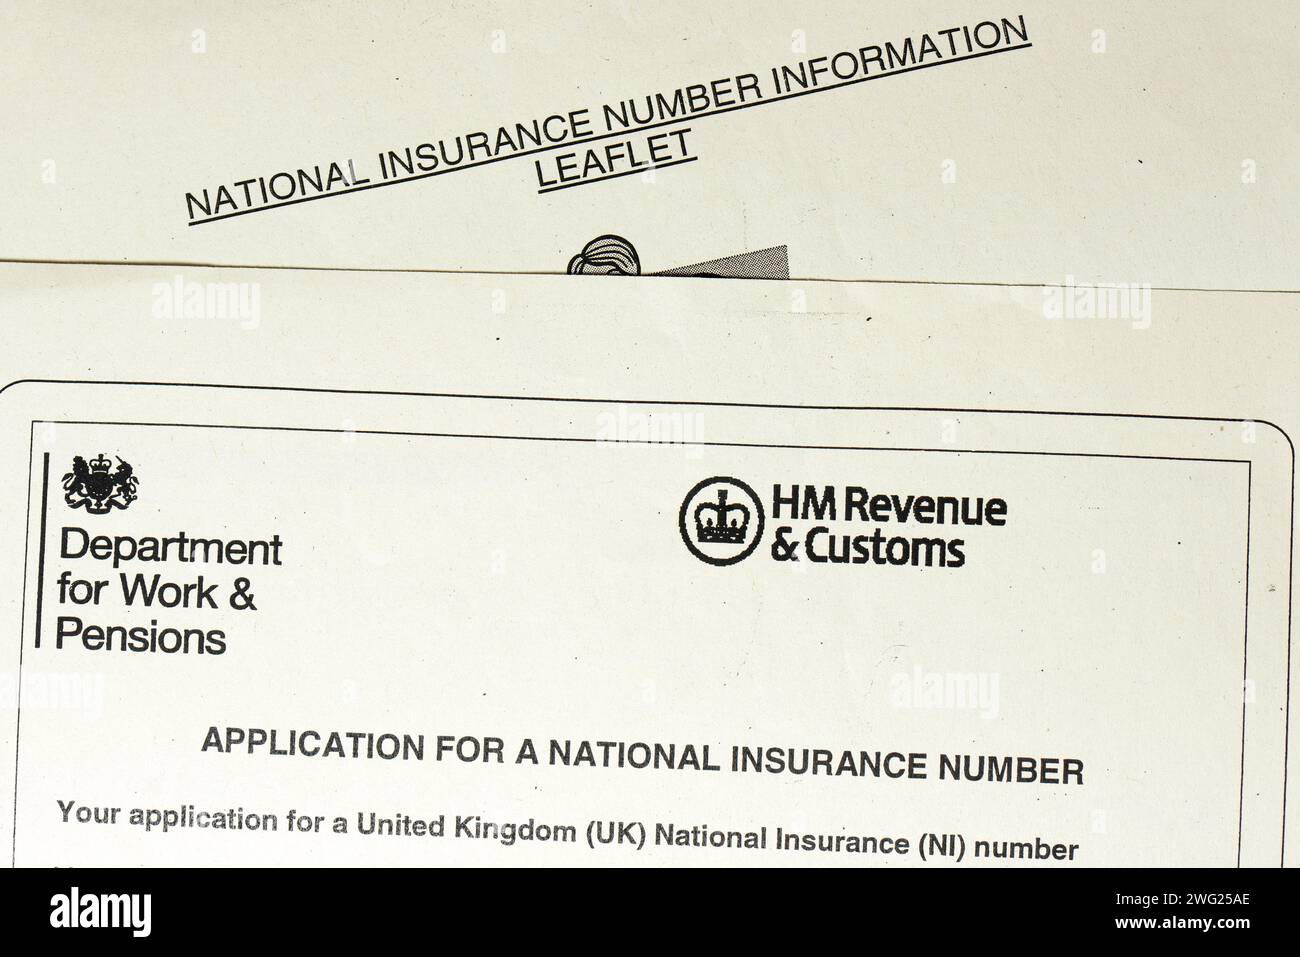 Department for Work and Pensions application form for a national insurance number in UK Stock Photo